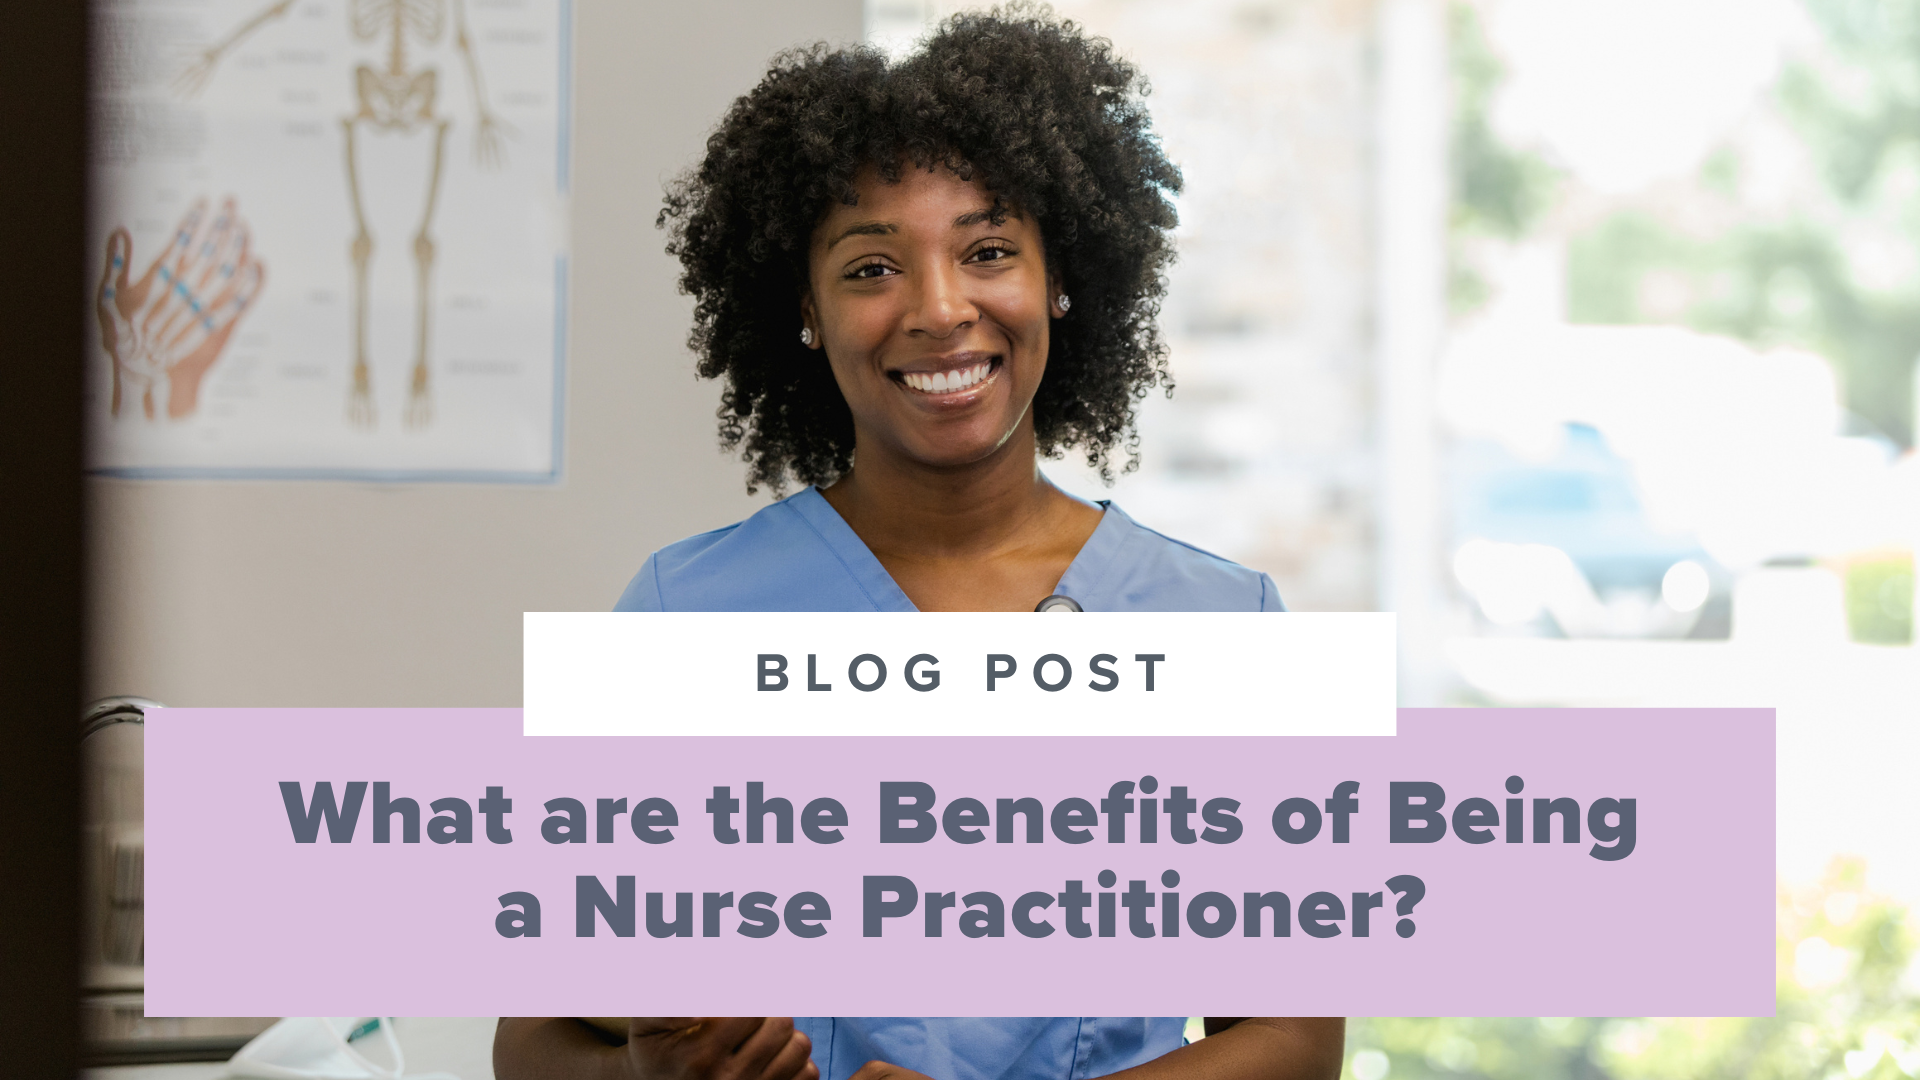 SMNP Blog - What are the Benefits of Being a Nurse Practitioner?